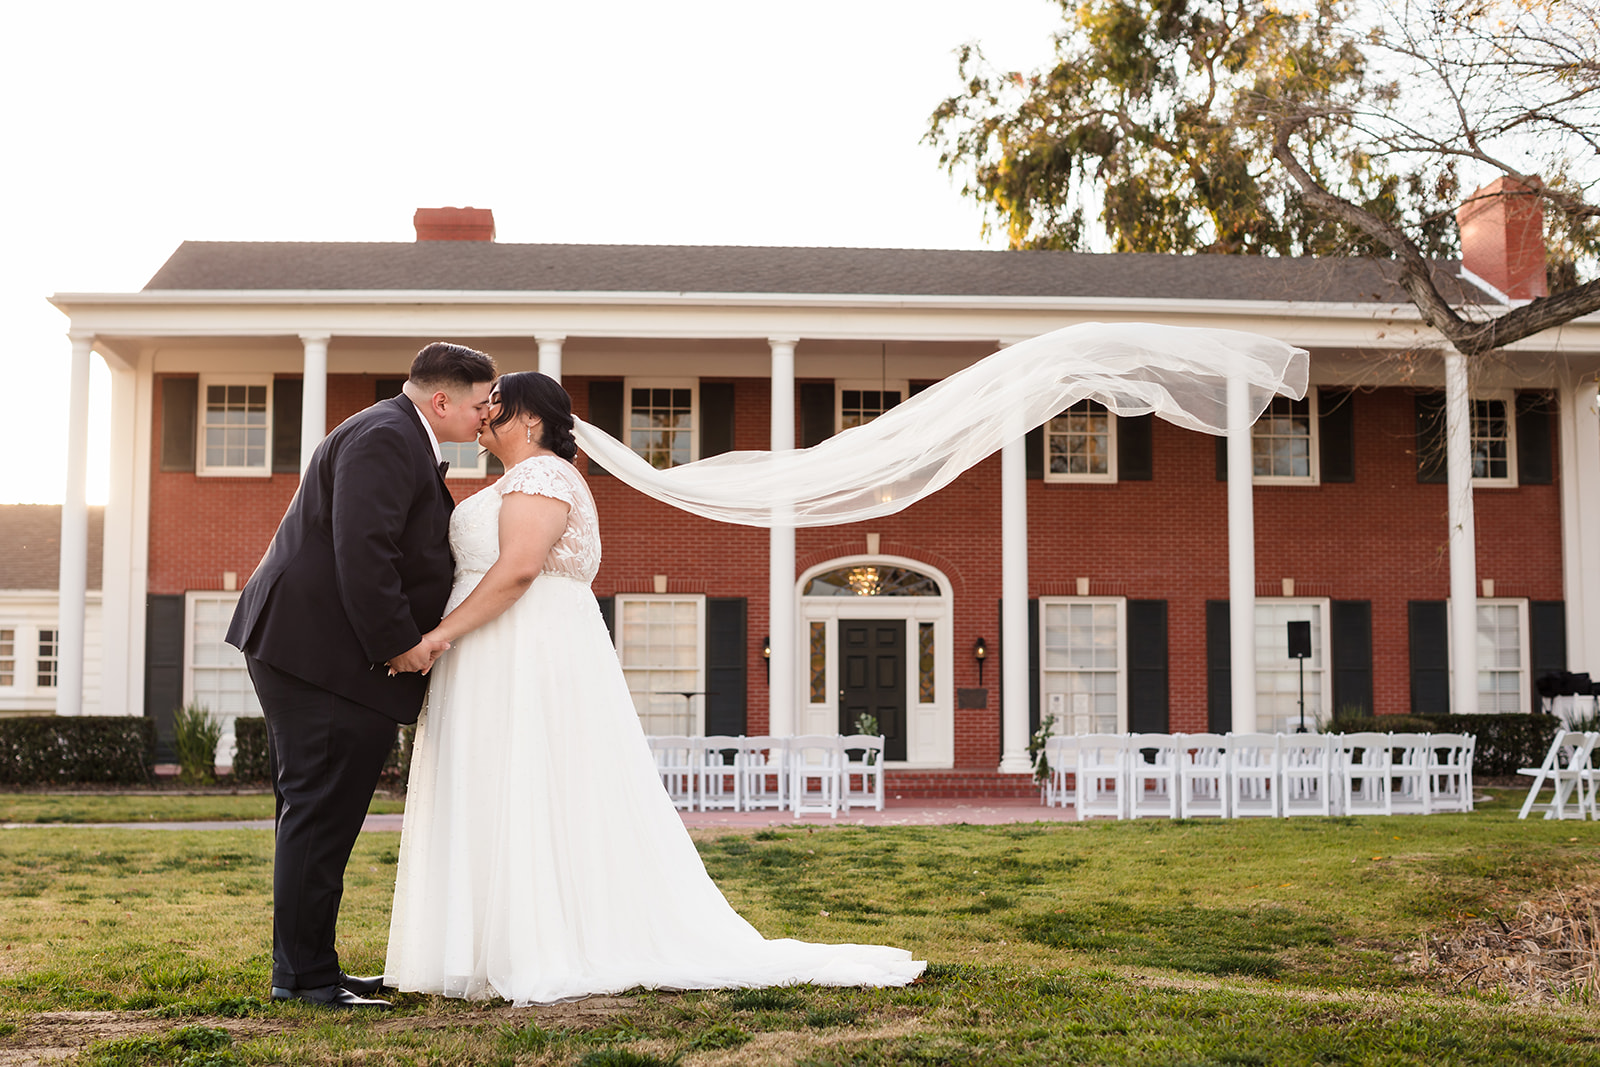 Bride and groom share a kiss in front of Crestmore Manor as bride's veil flows in the wind